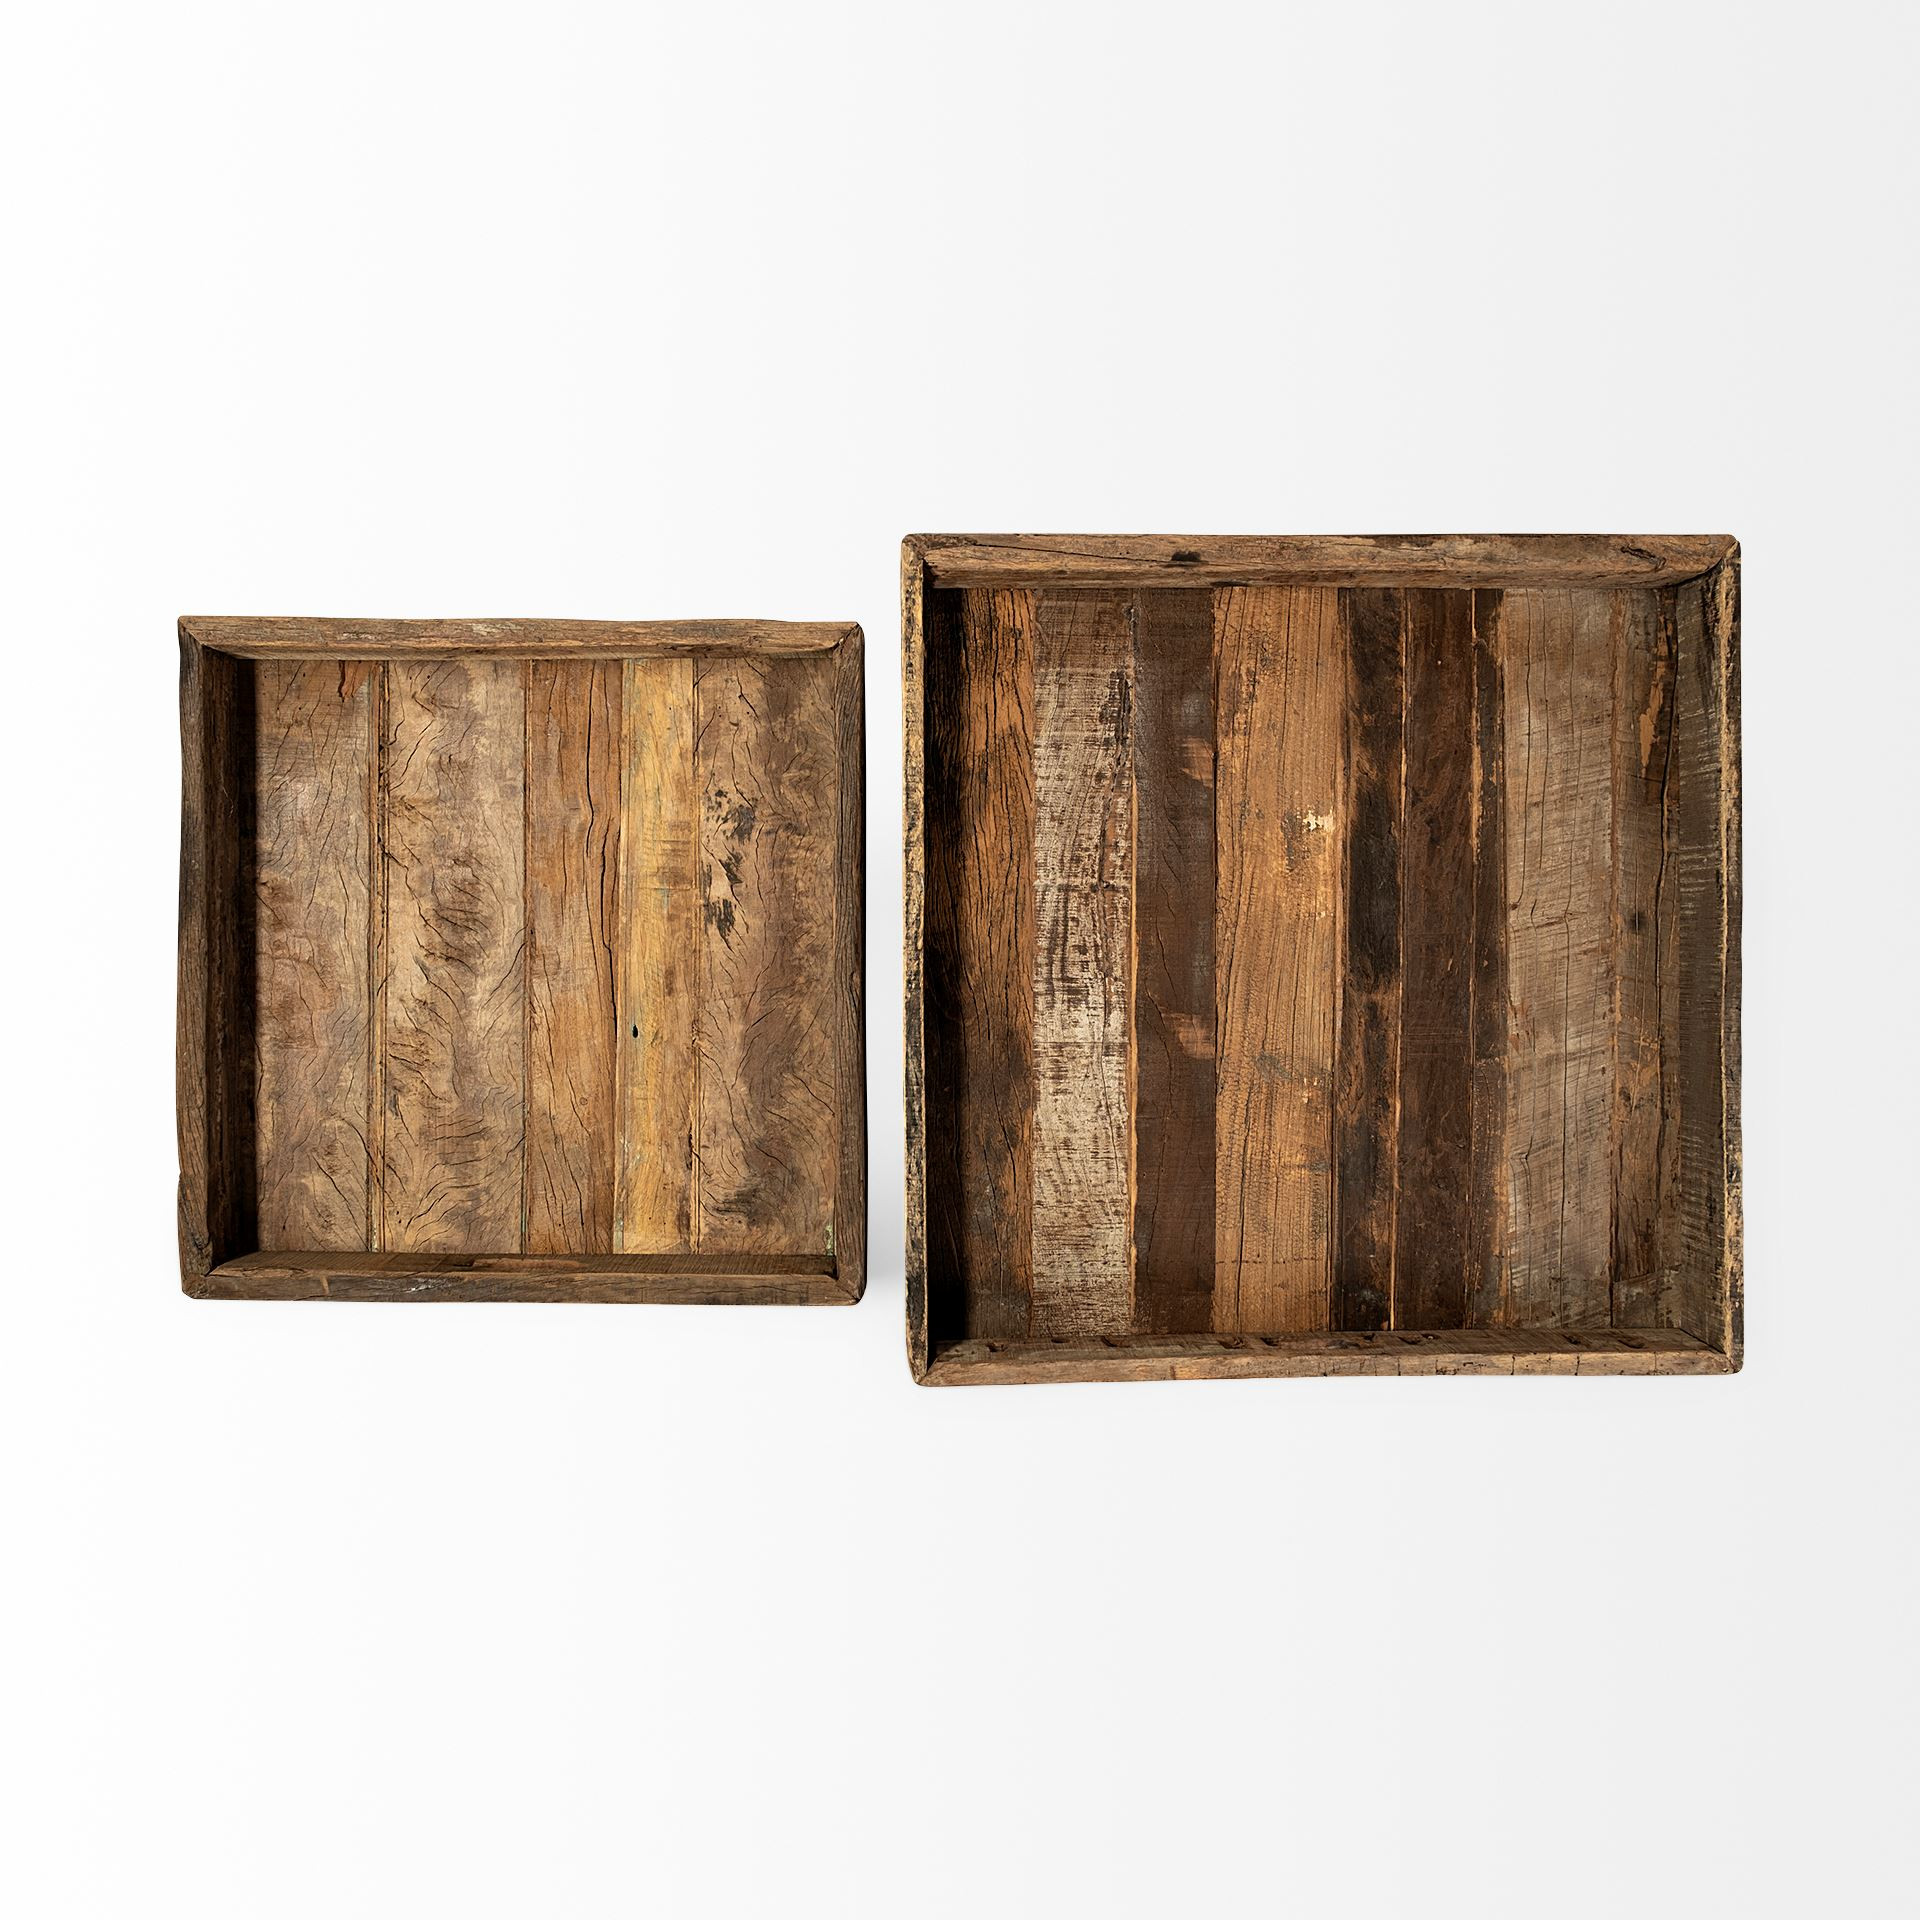 Natural Brown Reclaimed Wood Tray